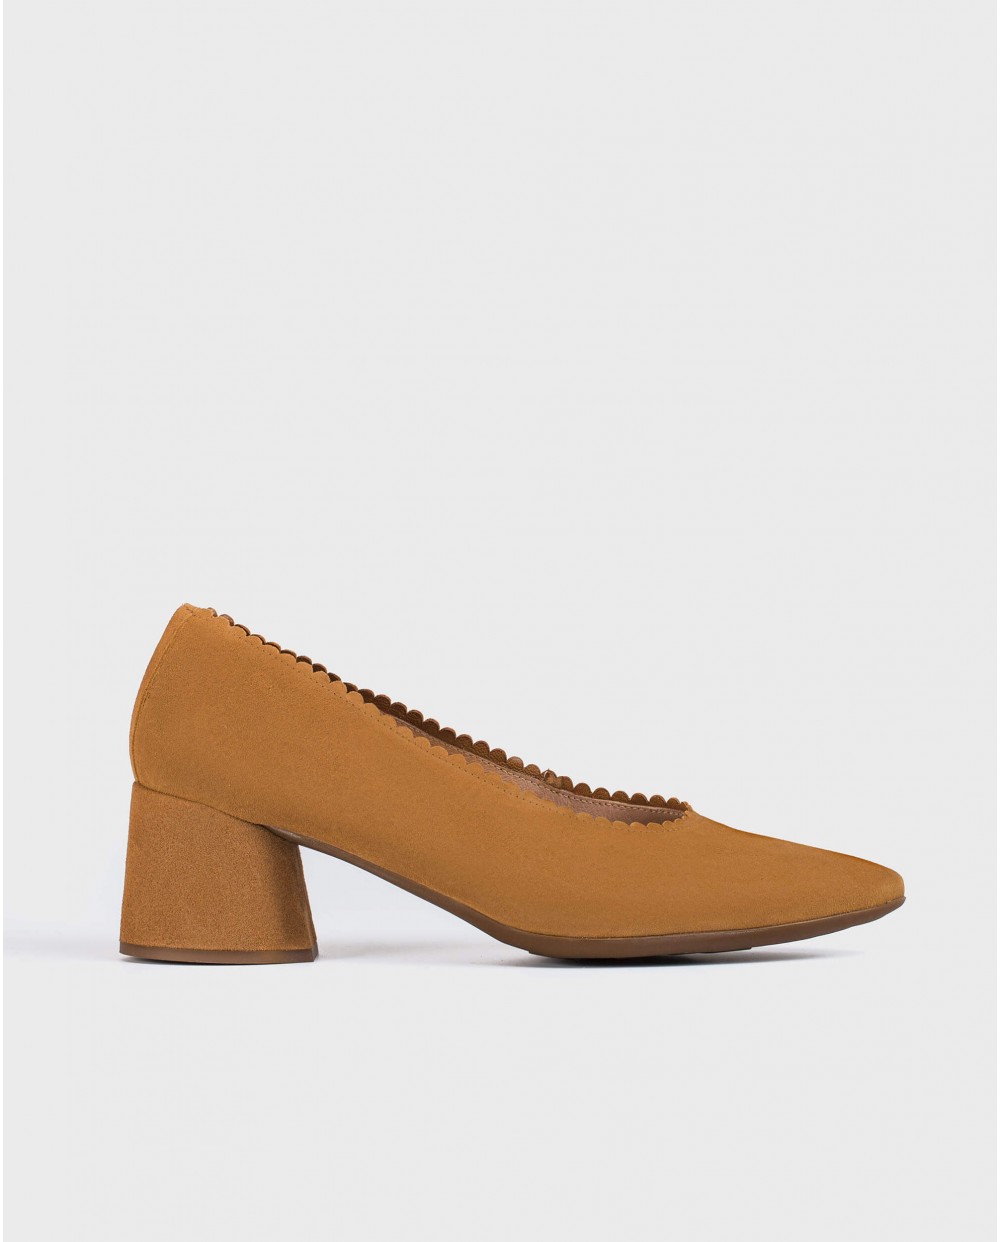 Wonders-Outlet-Midi-heeled court shoe